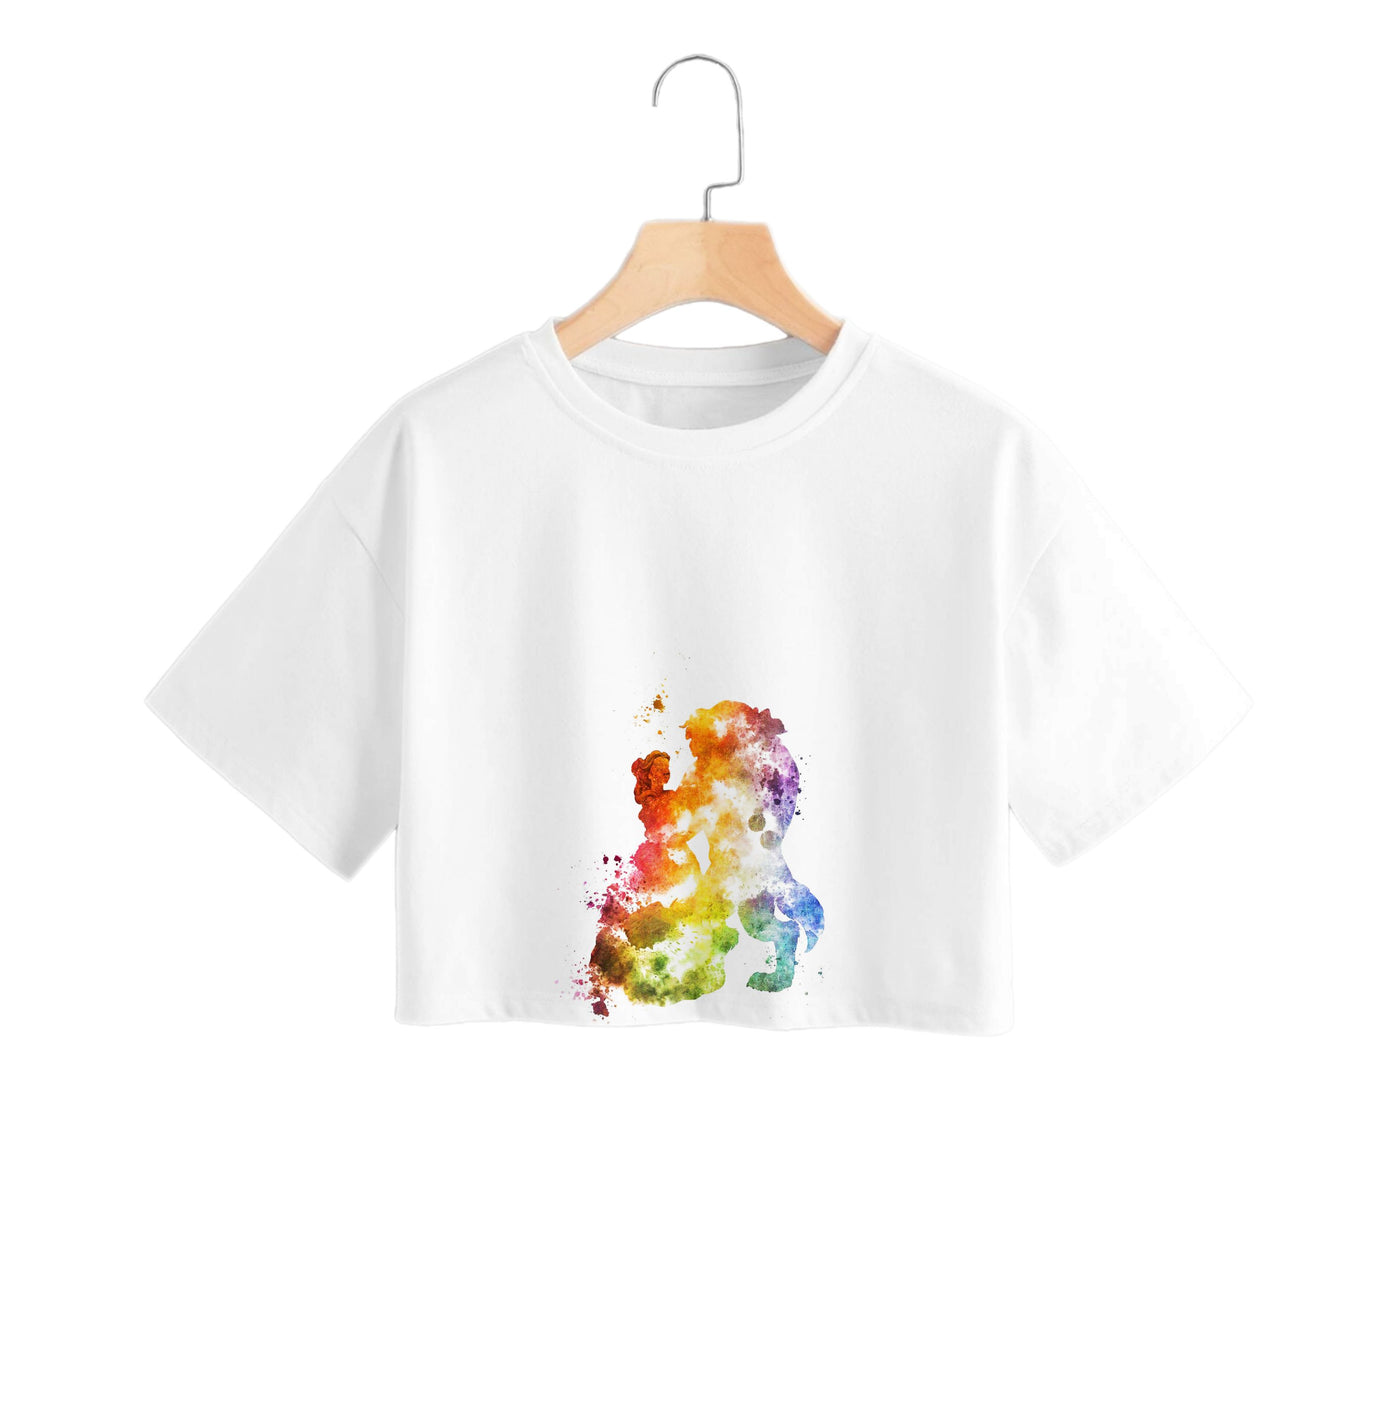 Watercolour Beauty and the Beast Disney Crop Top